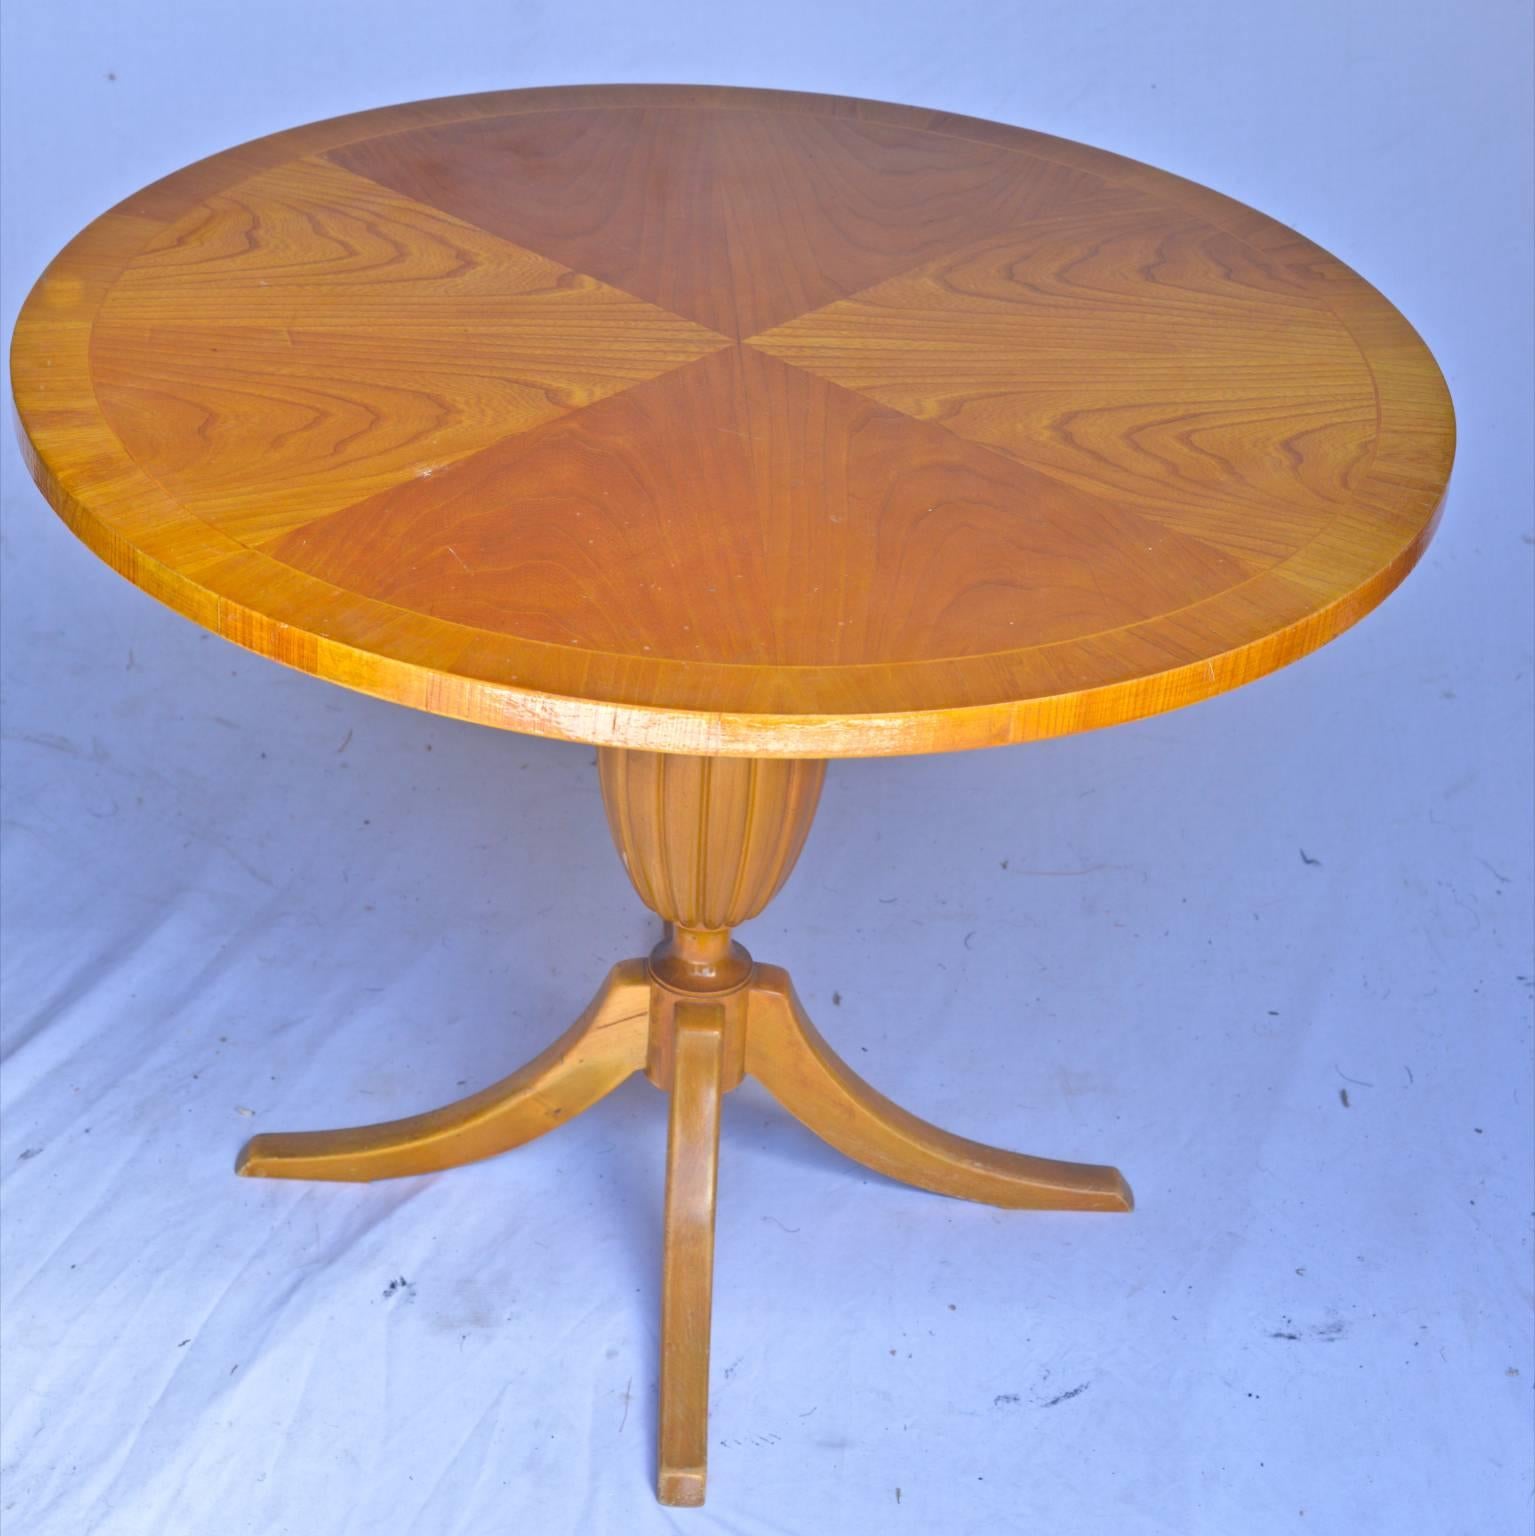 Unusual antique Swedish Biedermeier circular occasional table in stunning tiger stripe and golden birch veneers and four elegant slim curved feet.

The pedestal column in particular features an acorn shape motif.

Lovely honey color French